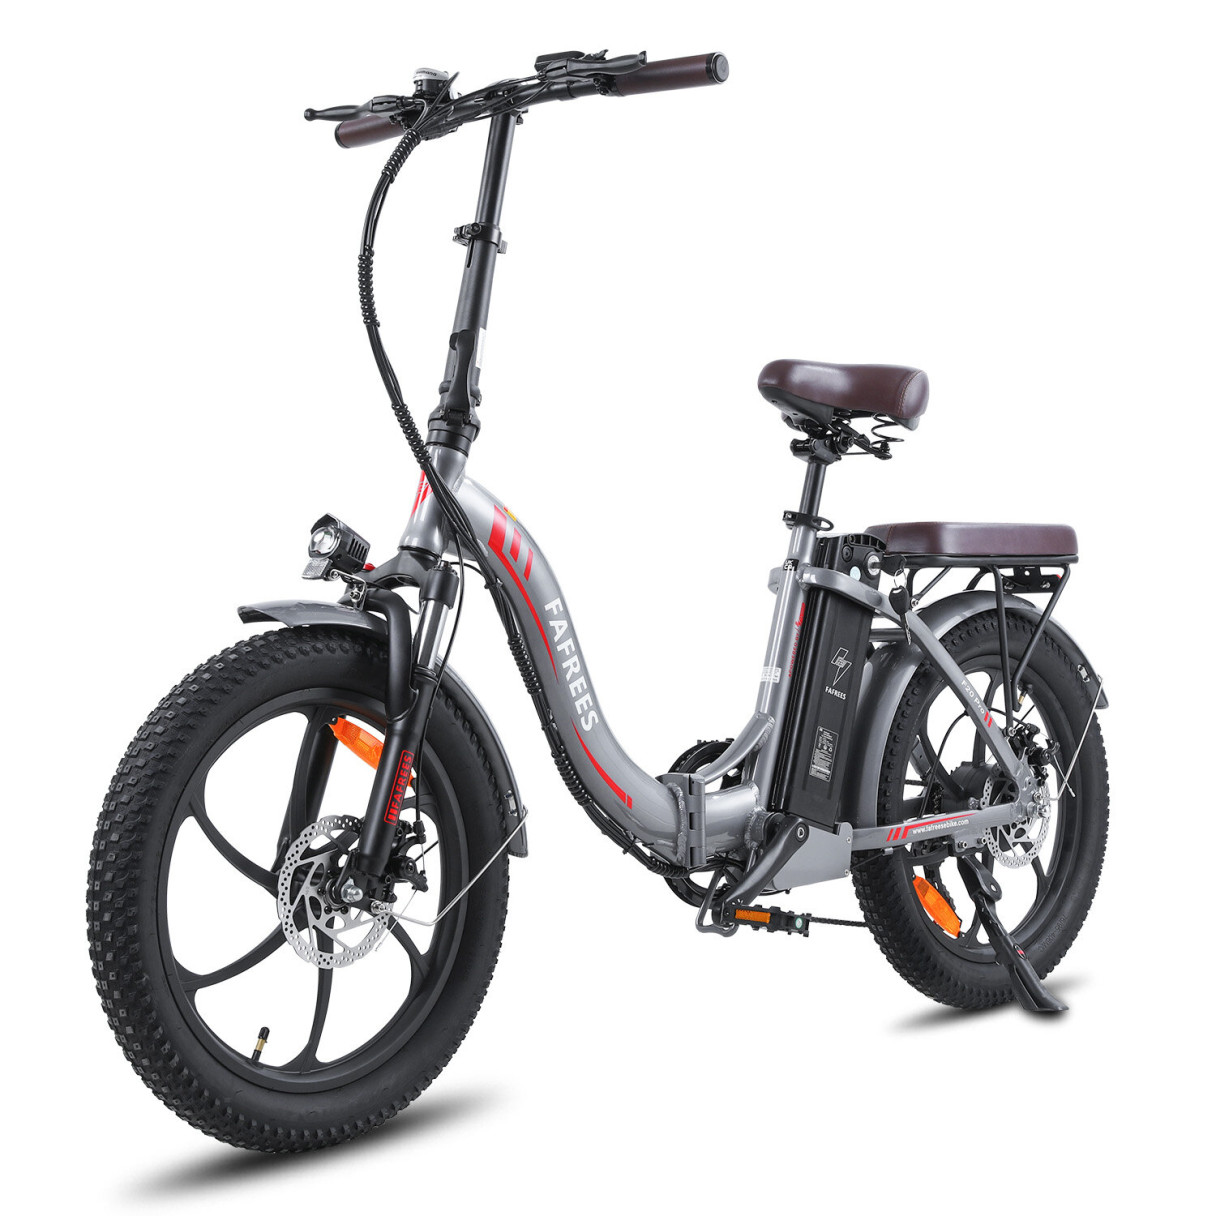 [EU DIRECT] FAFREES F20 PRO Electric Bike 36V 18AH Battery 250W Motor 20x3.0inch Tires 25KM/H Top Speed 120-150KM Max Mileage 150KG Max Load Folding Electric Bicycle